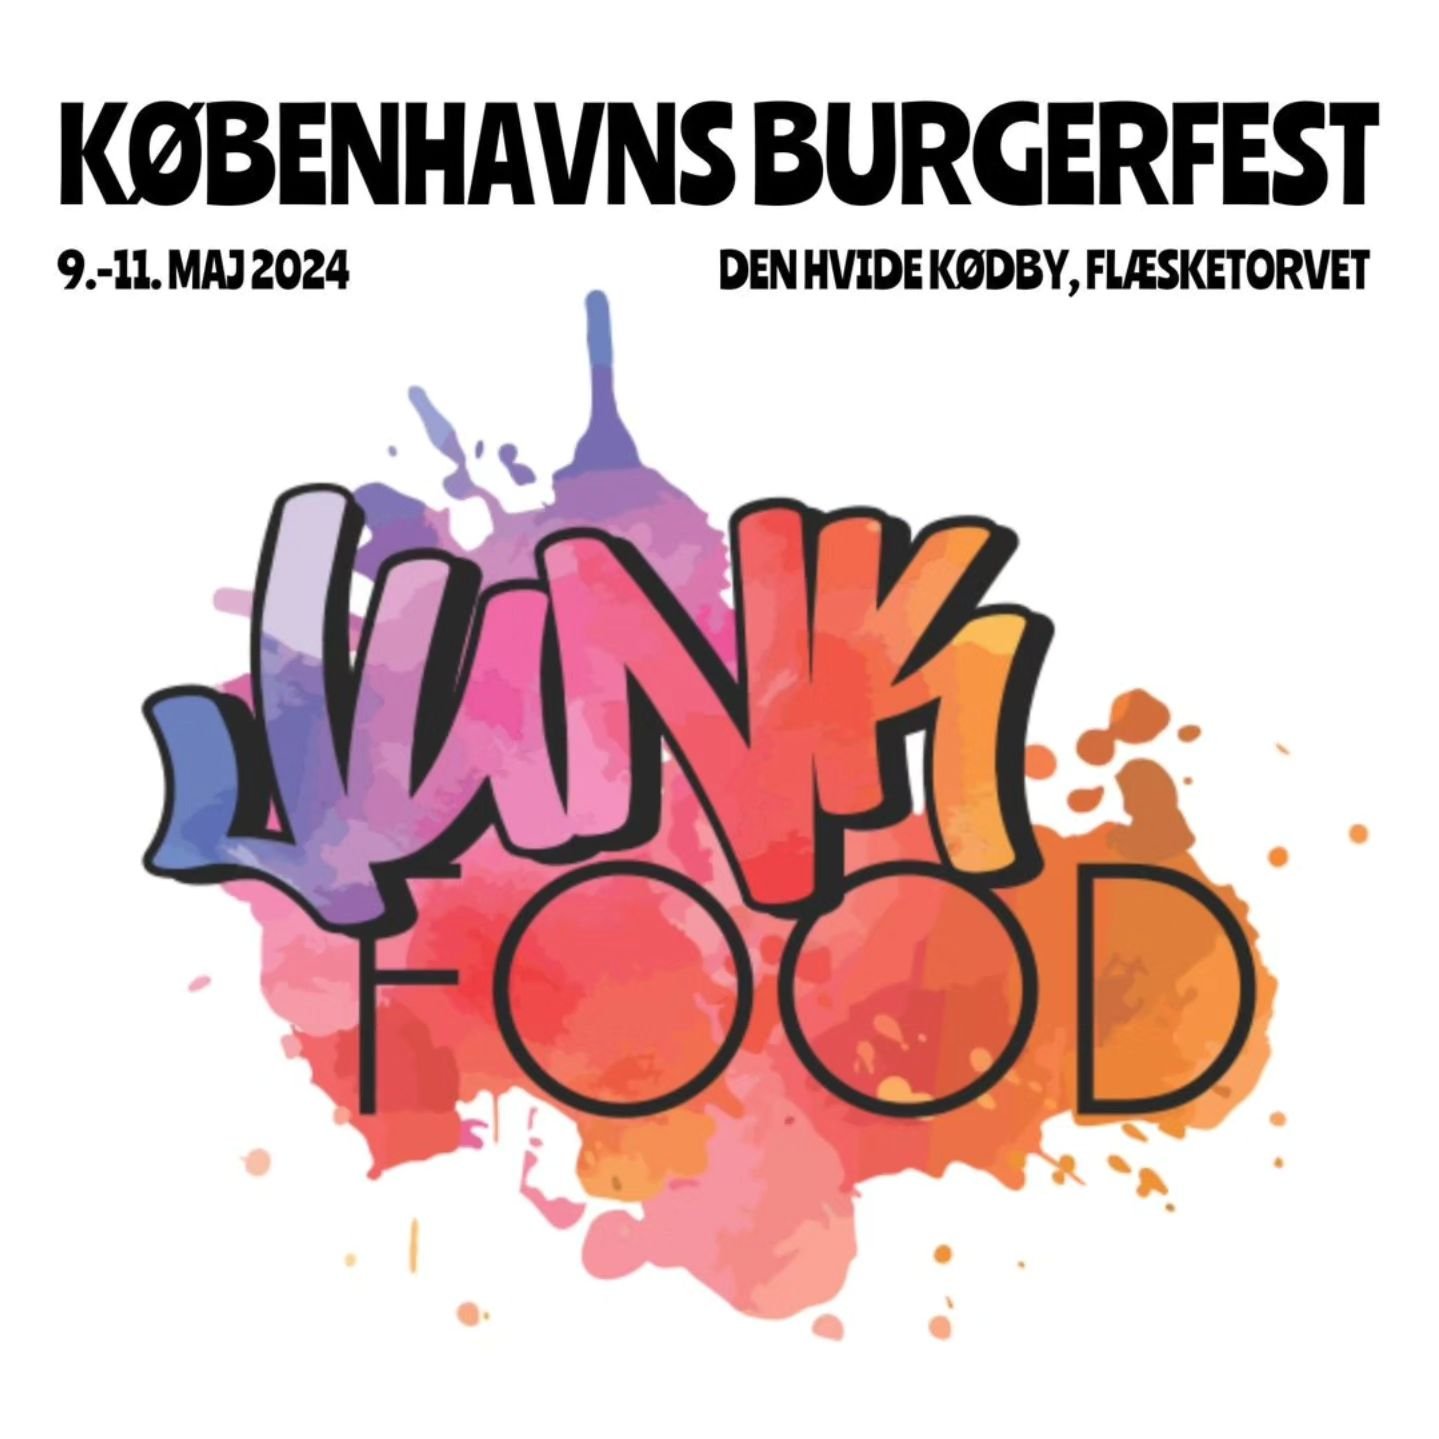 @kbhburgerfest starts tomorrow and your favourite fried chicken joint is doing a pop up on Friday. 12-16 Looking forward to presenting our butter chicken burger to the people 😋😋😋 you can still buy presale tickets with the link in our bio ❤️